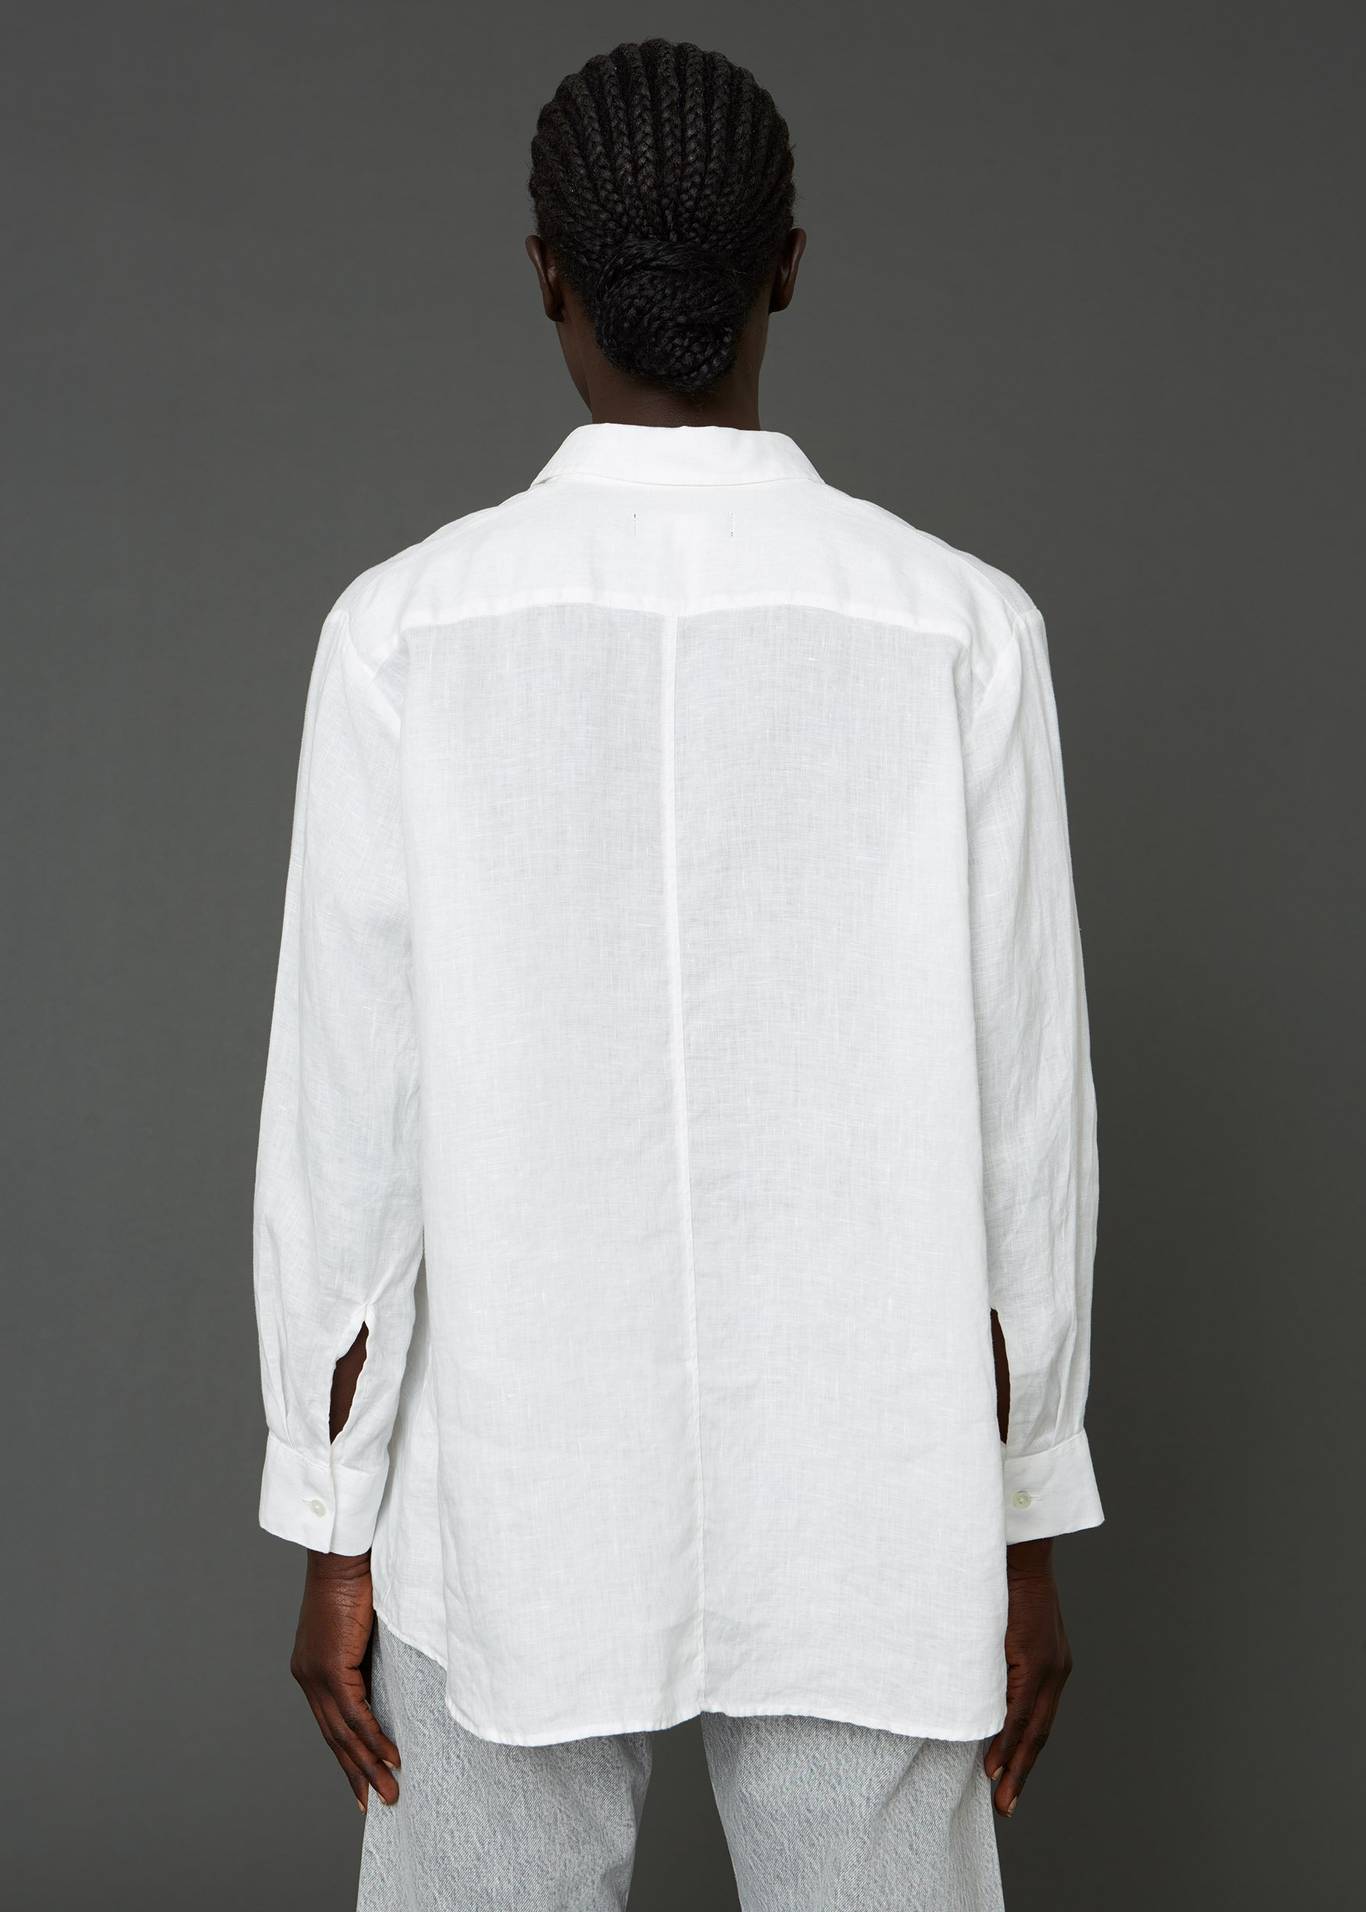 Elma linen shirt in off white by Hope